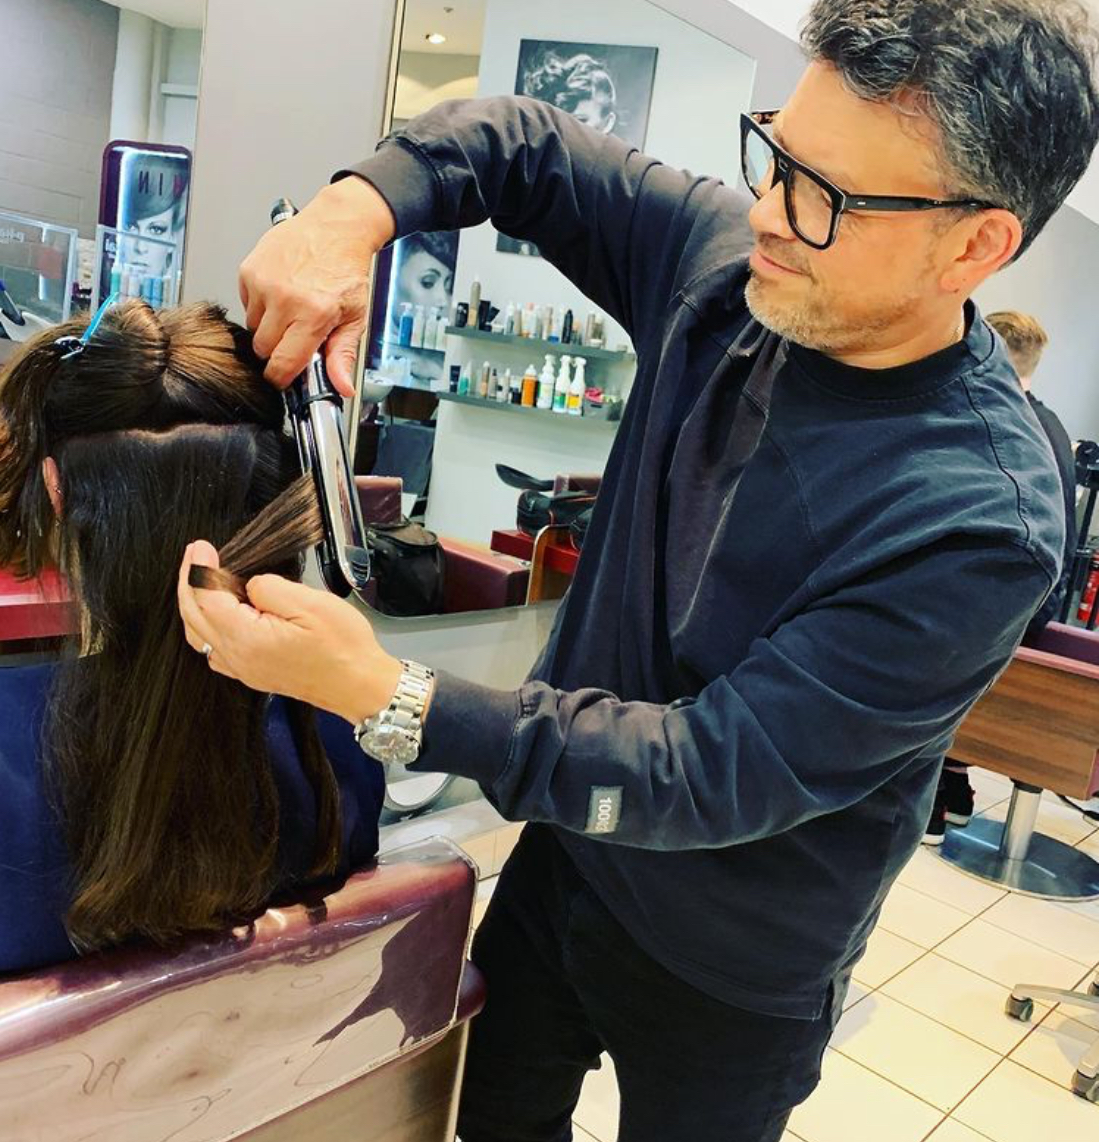 Take the stress out of getting ready for an event, celebration or night out by booking in to have your hair professionally styled. From curls to braids we can have you looking your absolute best. #pkaihair #stylingappointments #hairups #celebrations #peterboroughuk